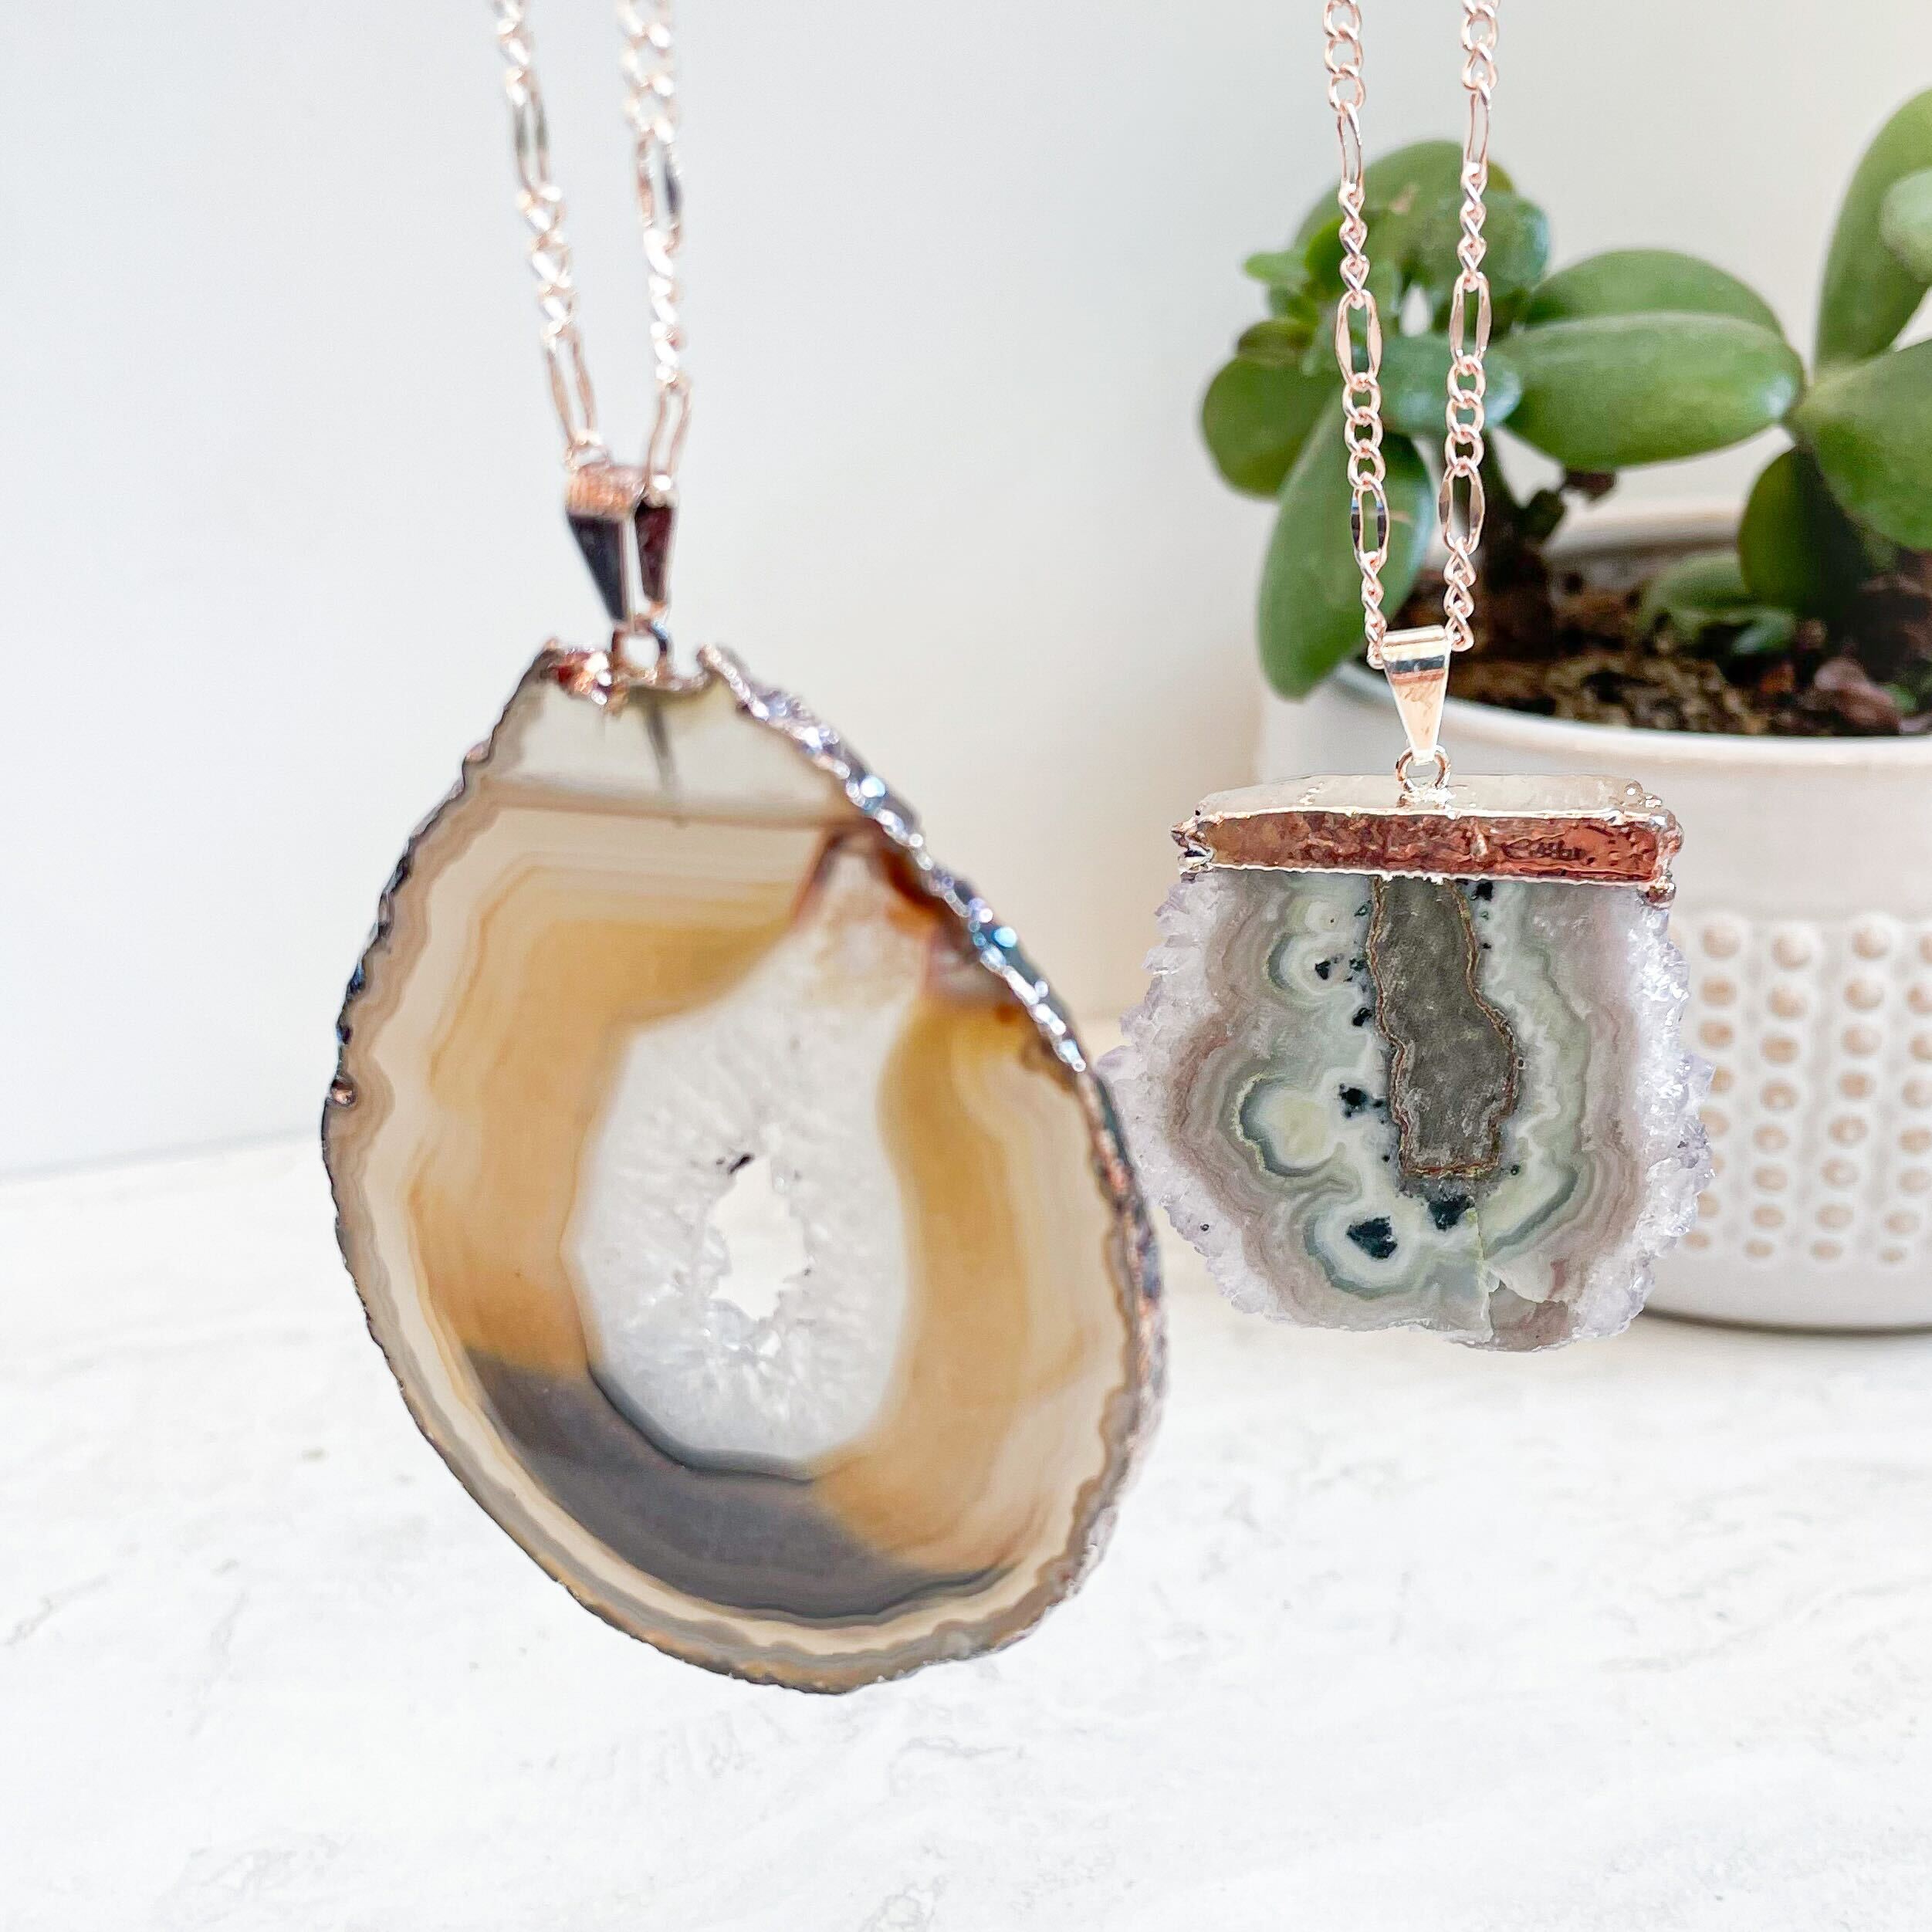 Druzy Slice Agate Pendant with Plated Edge